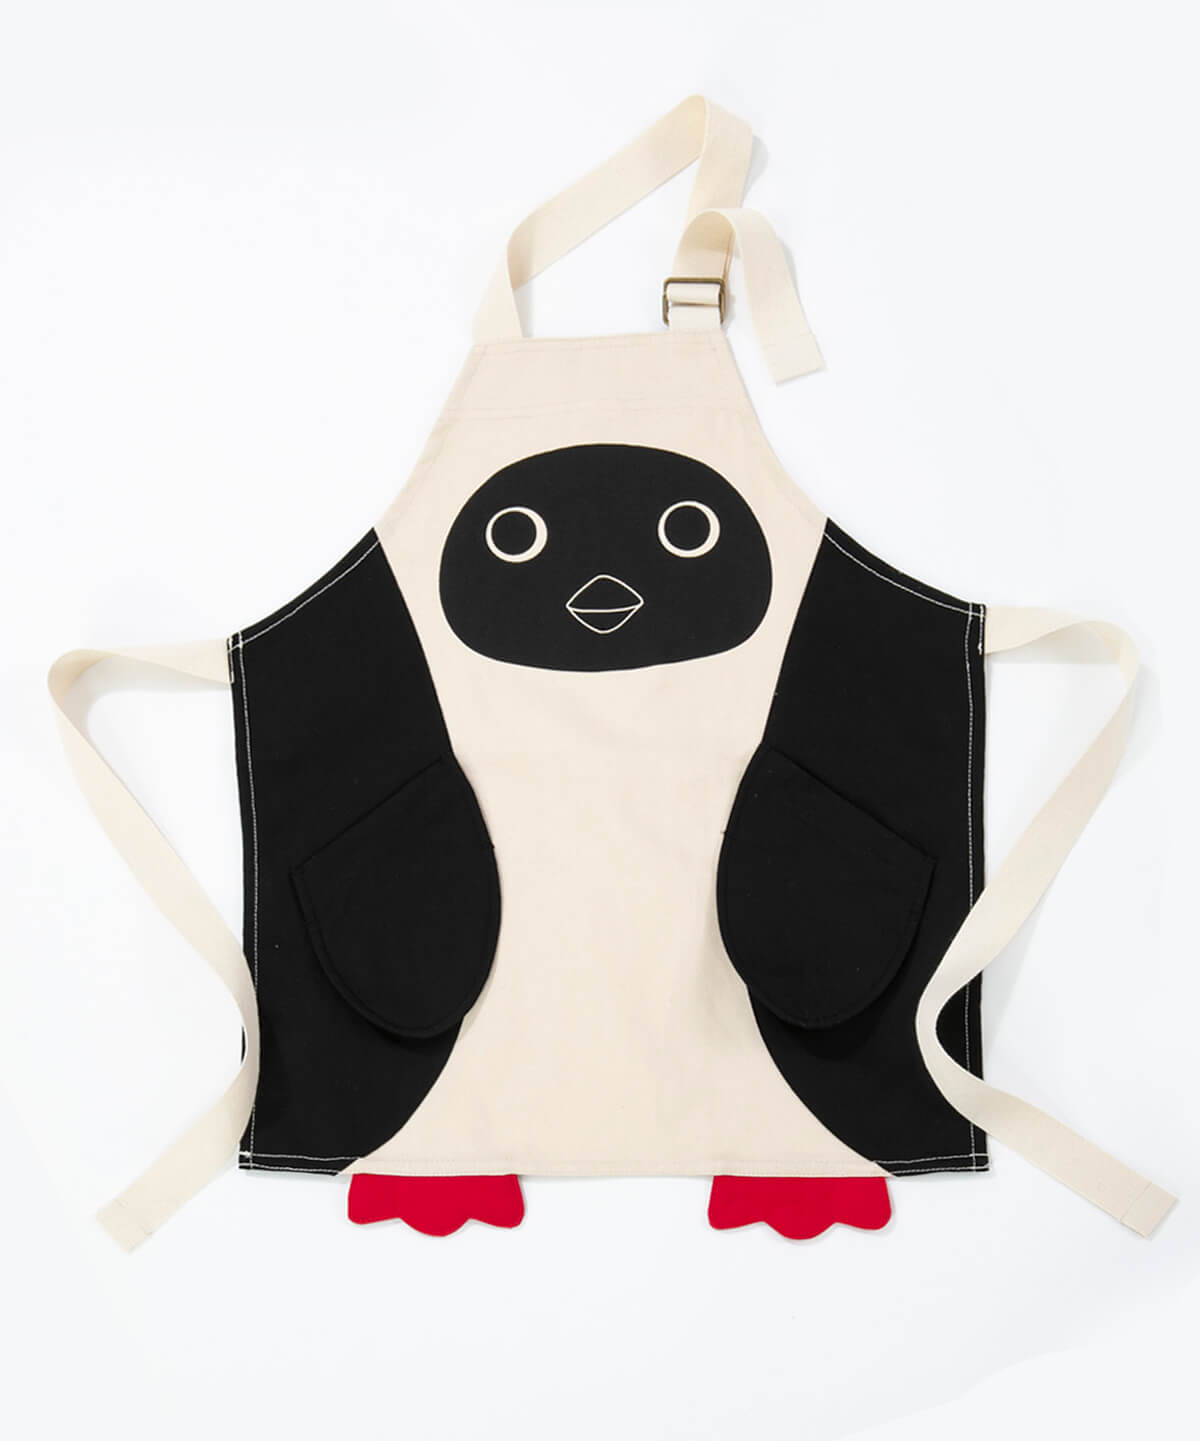 Kid's Booby Apron(キッズブービーエプロン(キッズ｜エプロン))